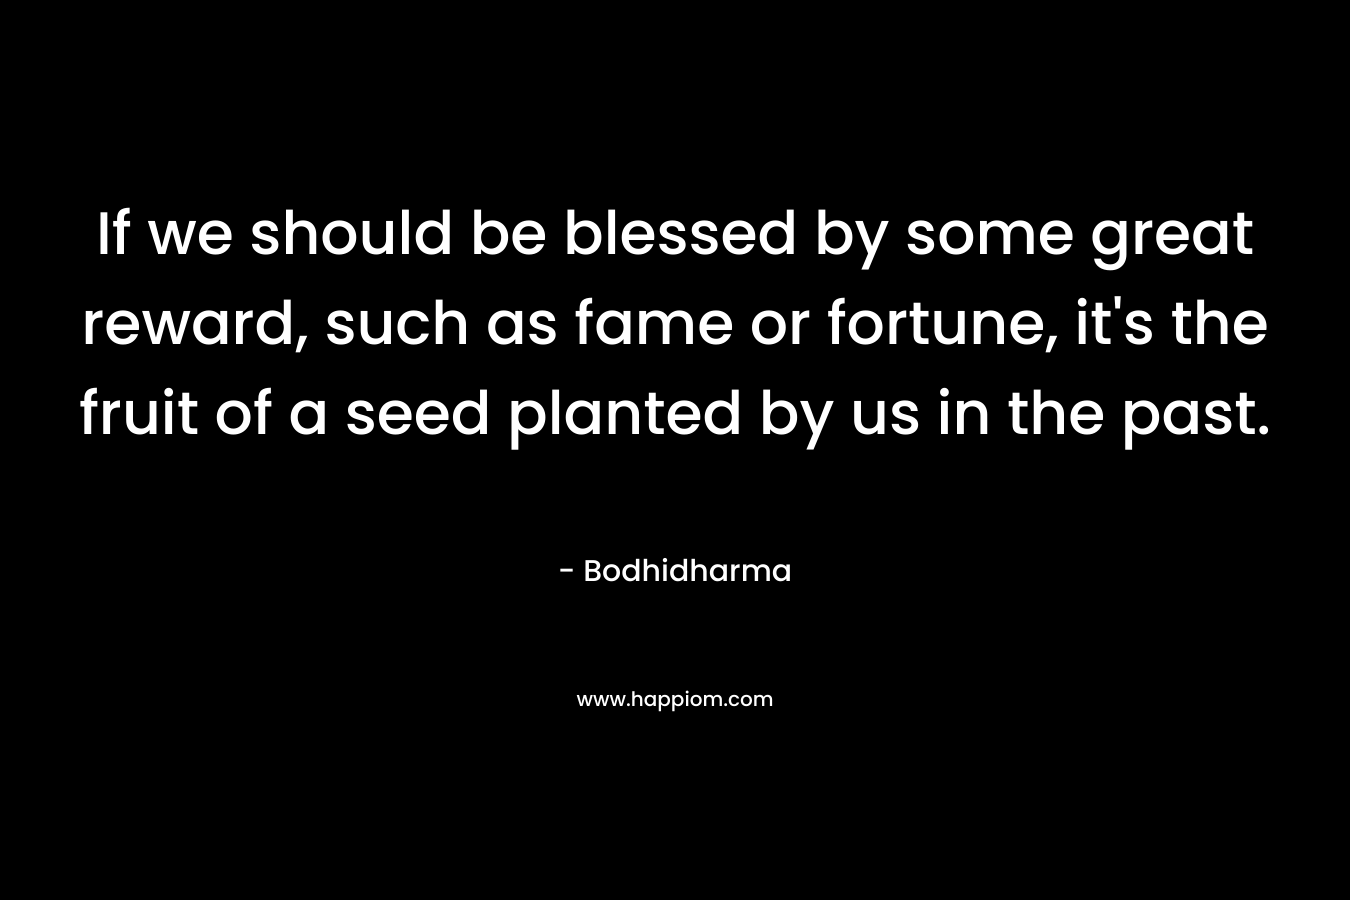 If we should be blessed by some great reward, such as fame or fortune, it’s the fruit of a seed planted by us in the past. – Bodhidharma